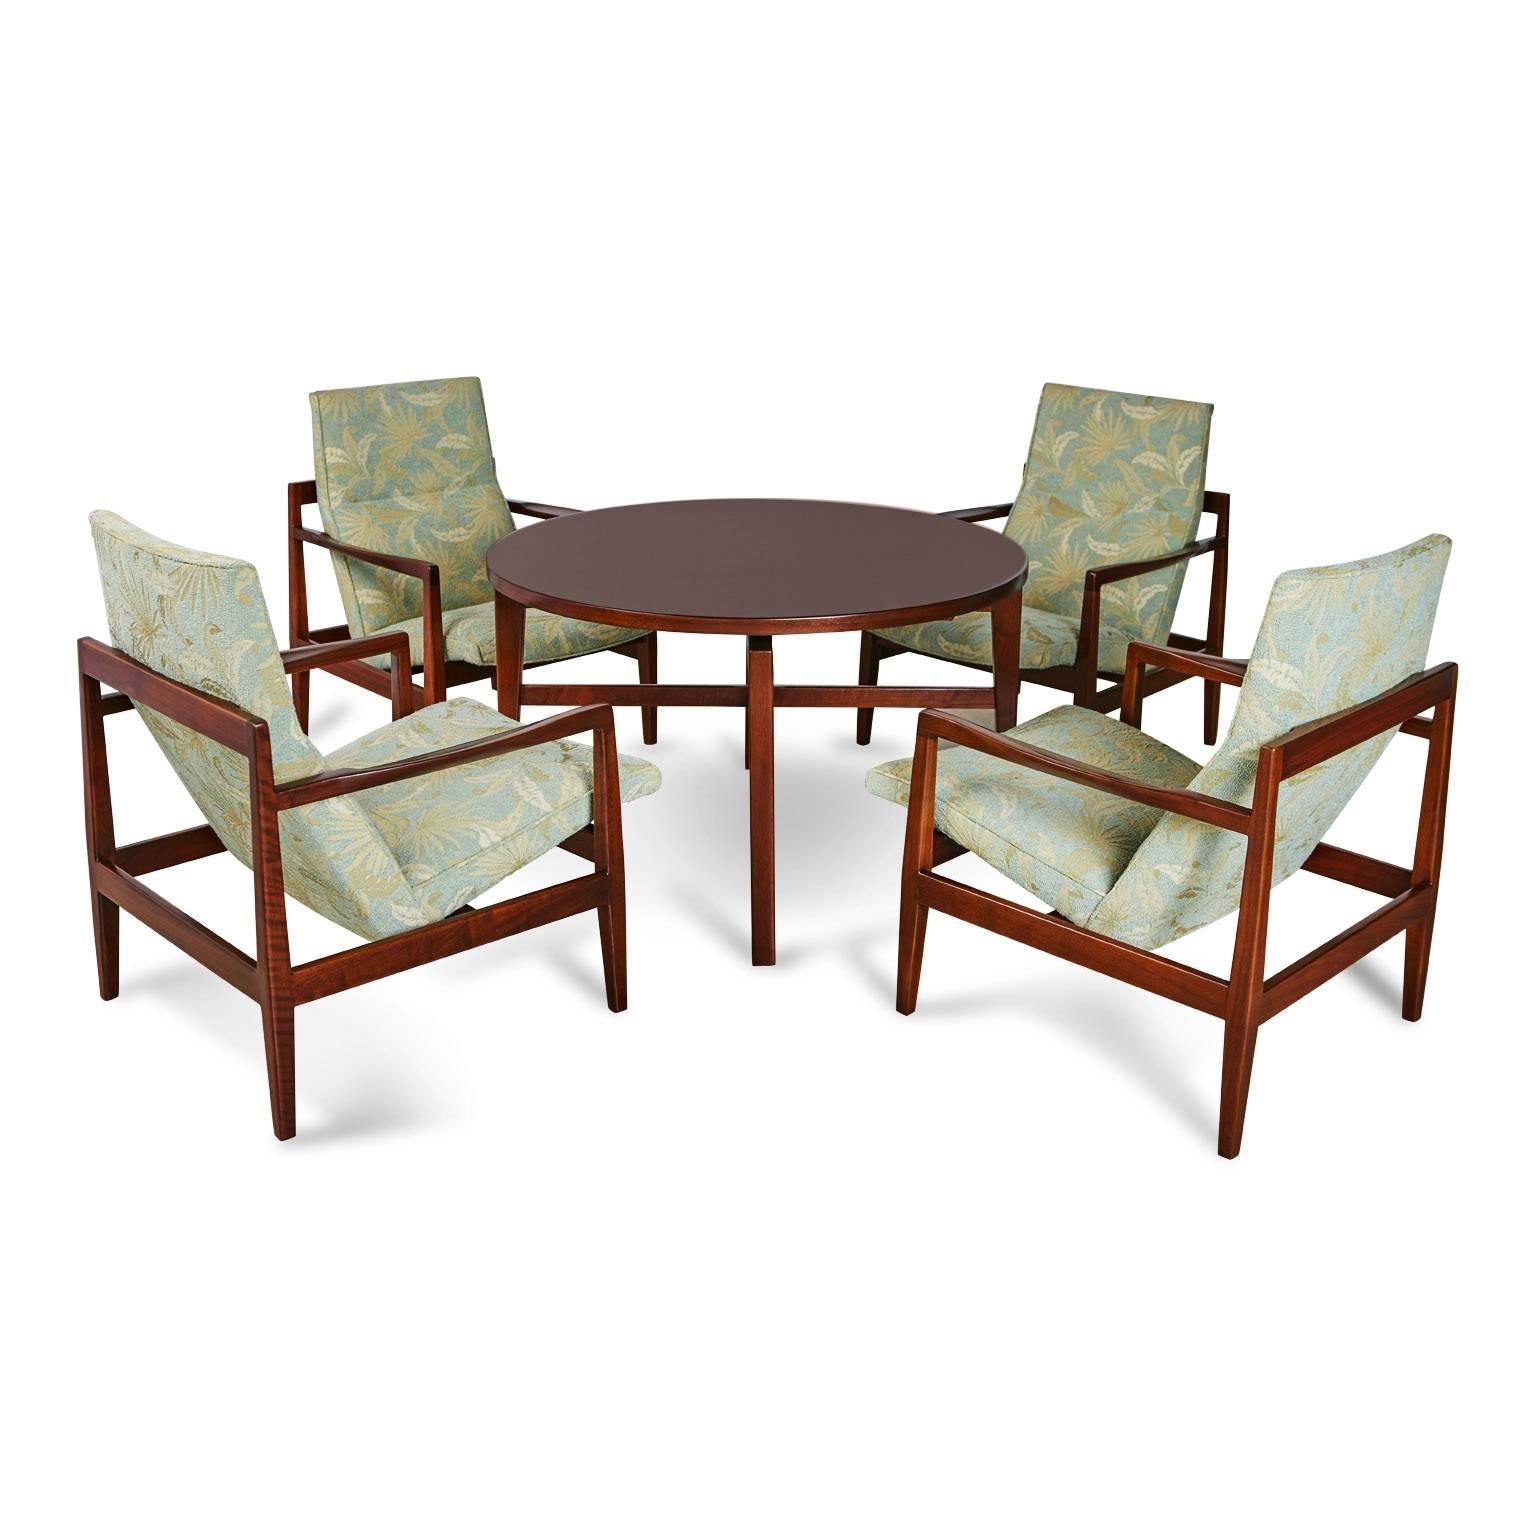 Mid-20th Century Jens Risom Floating Walnut Lounge Chairs Set of Four (4), Restored, Circa 1960